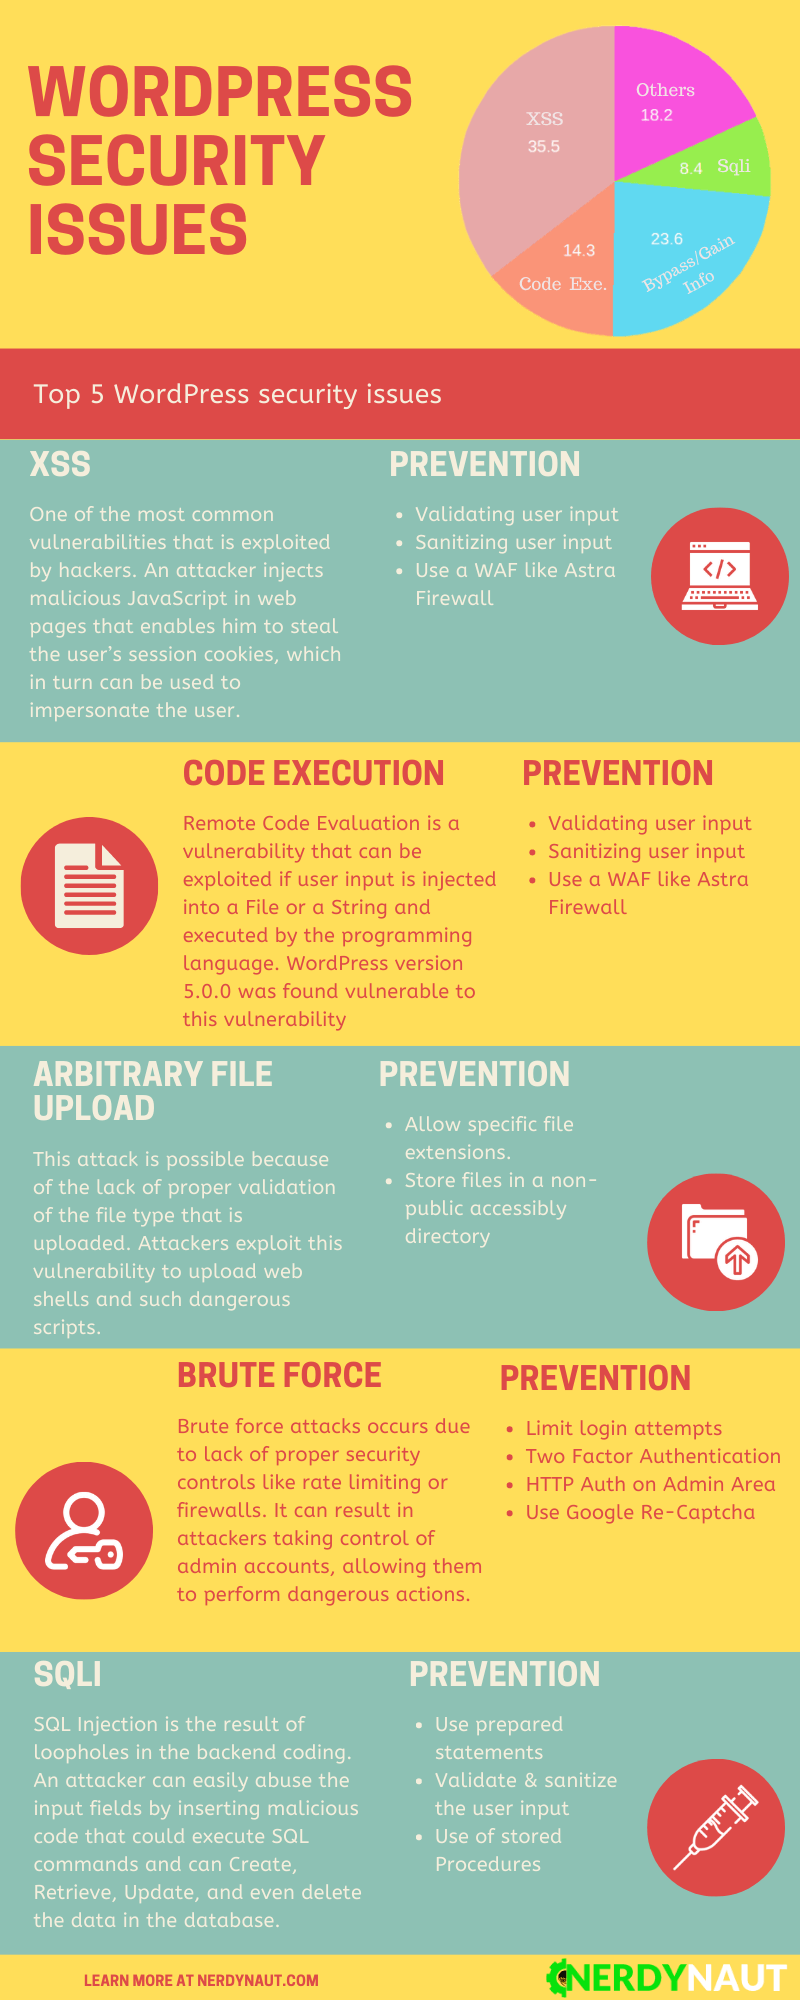 WordPress Security Issues Infographic